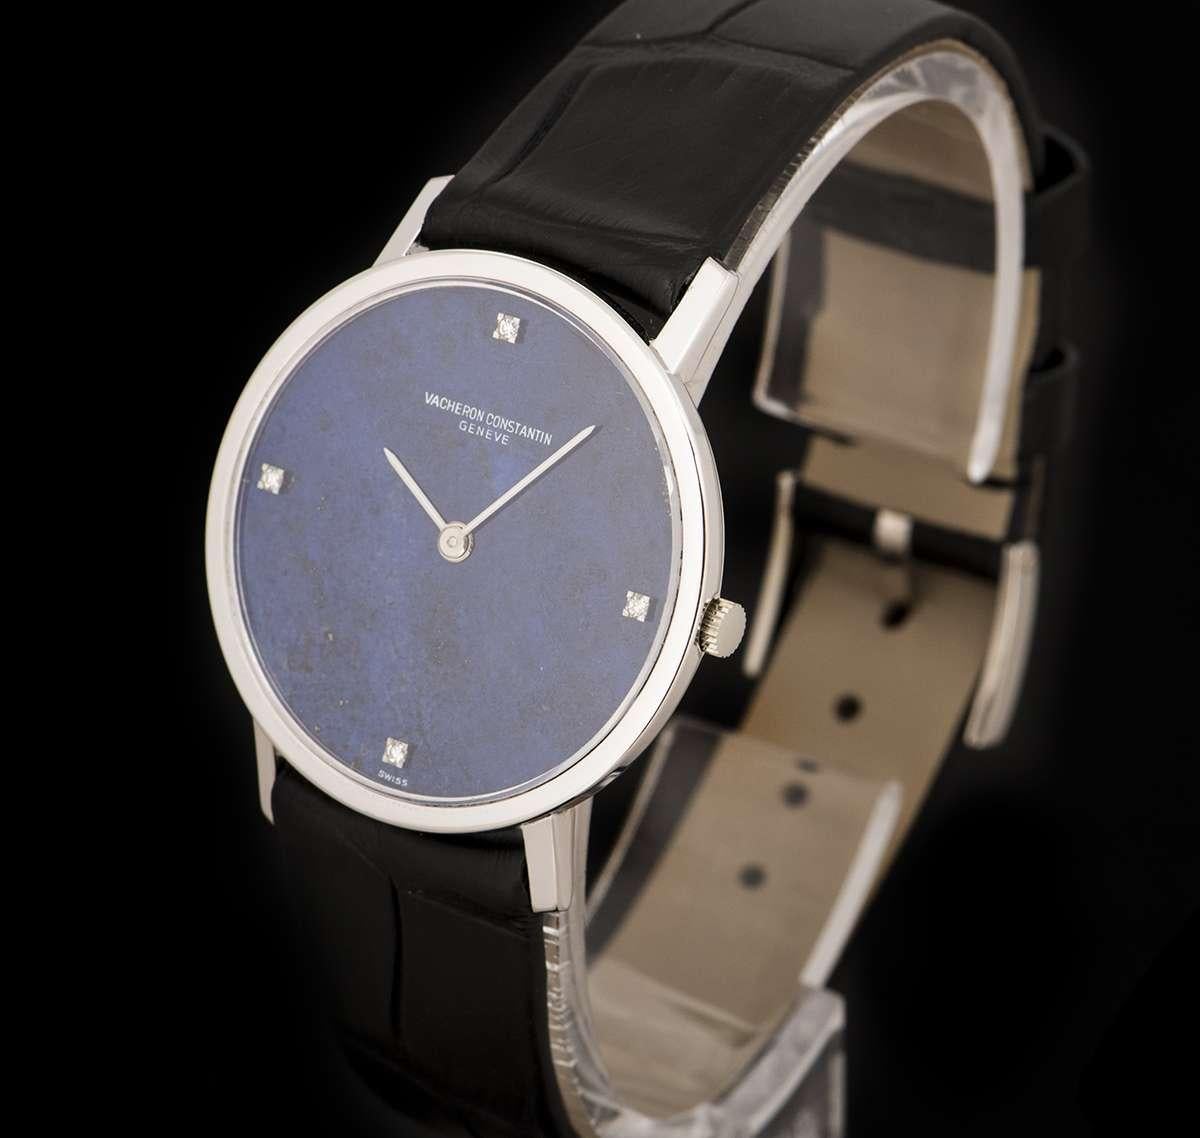 An 18k White Gold Mid-Size Dress Wristwatch, lapis lazuli dial set with 4 round brilliant cut diamond hour markers, a fixed 18k white gold bezel, a brand new original black leather strap with an 18k white gold pin buckle, sapphire glass, manual wind